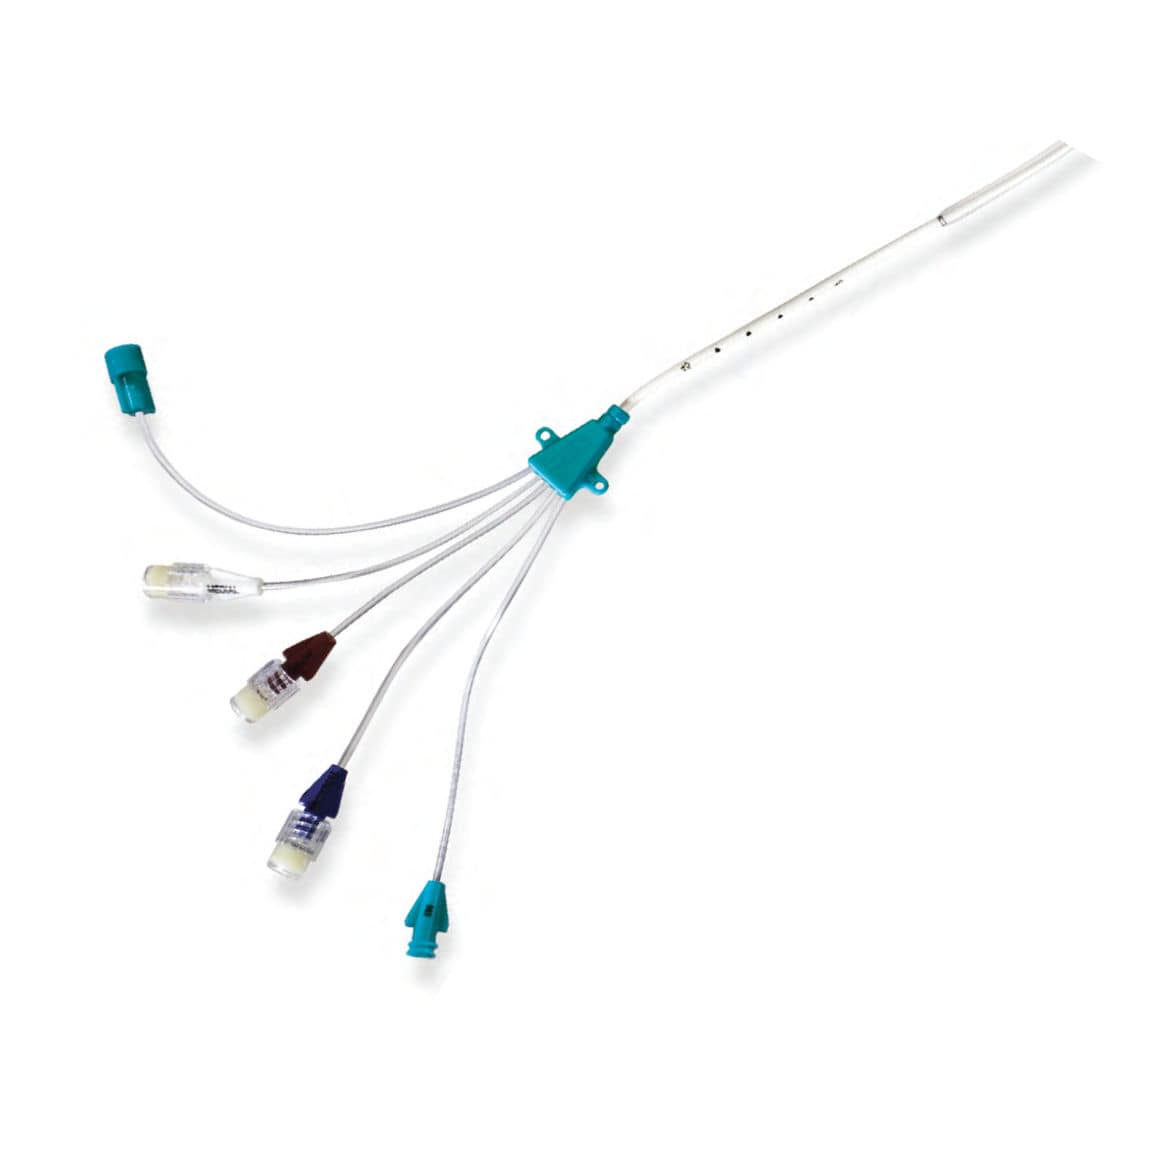 Central catheter - iCare